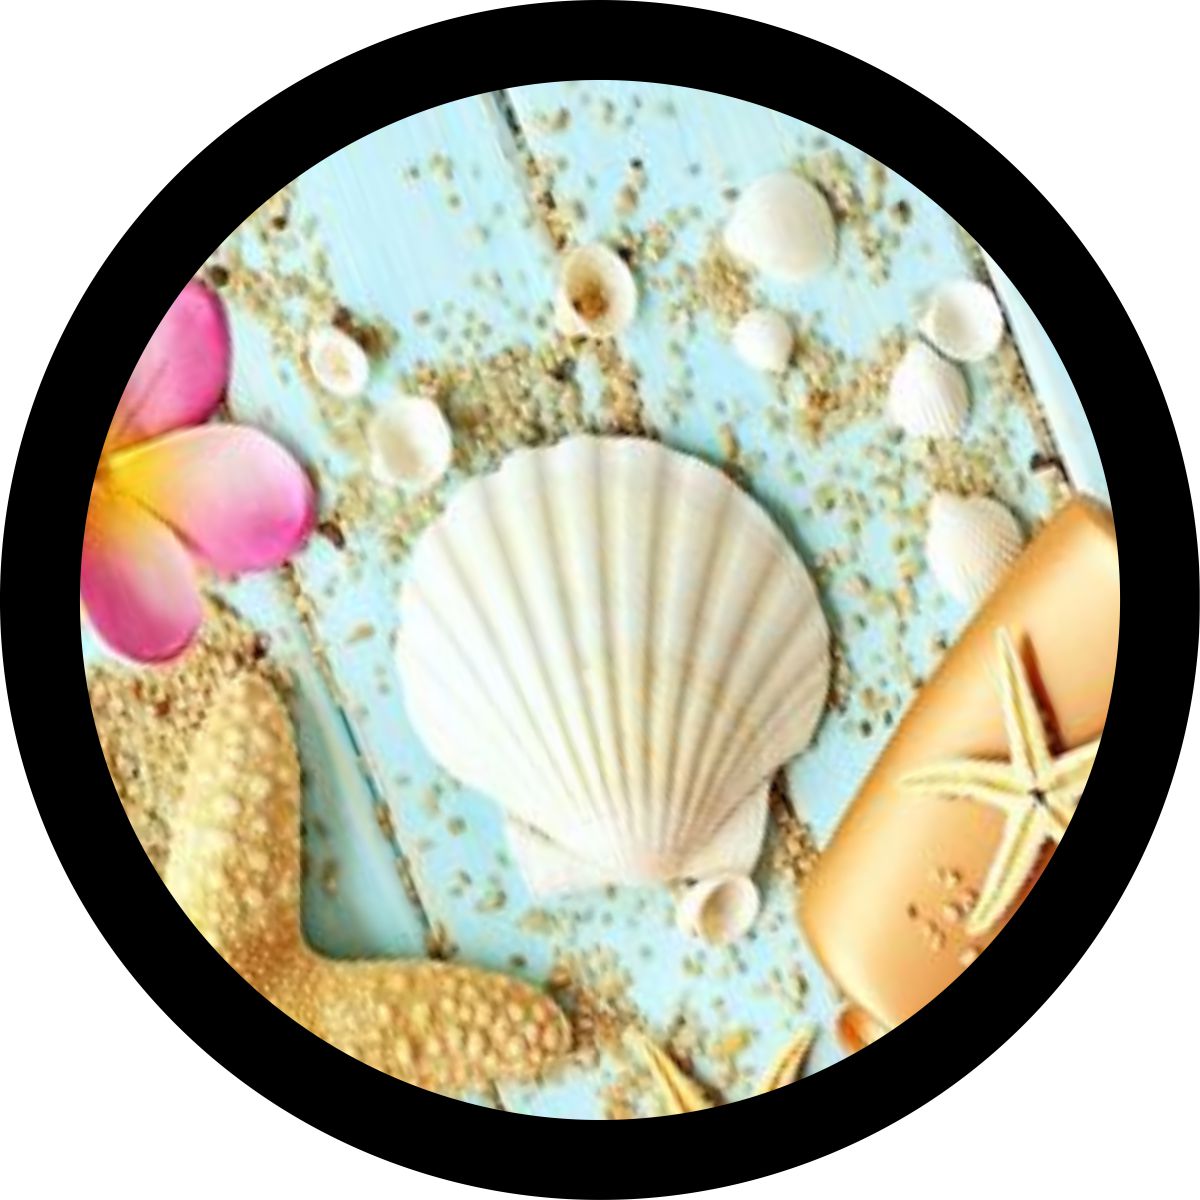 A spare tire cover mock up design of seashells, plumeria flower, starfish, and sand on wood.